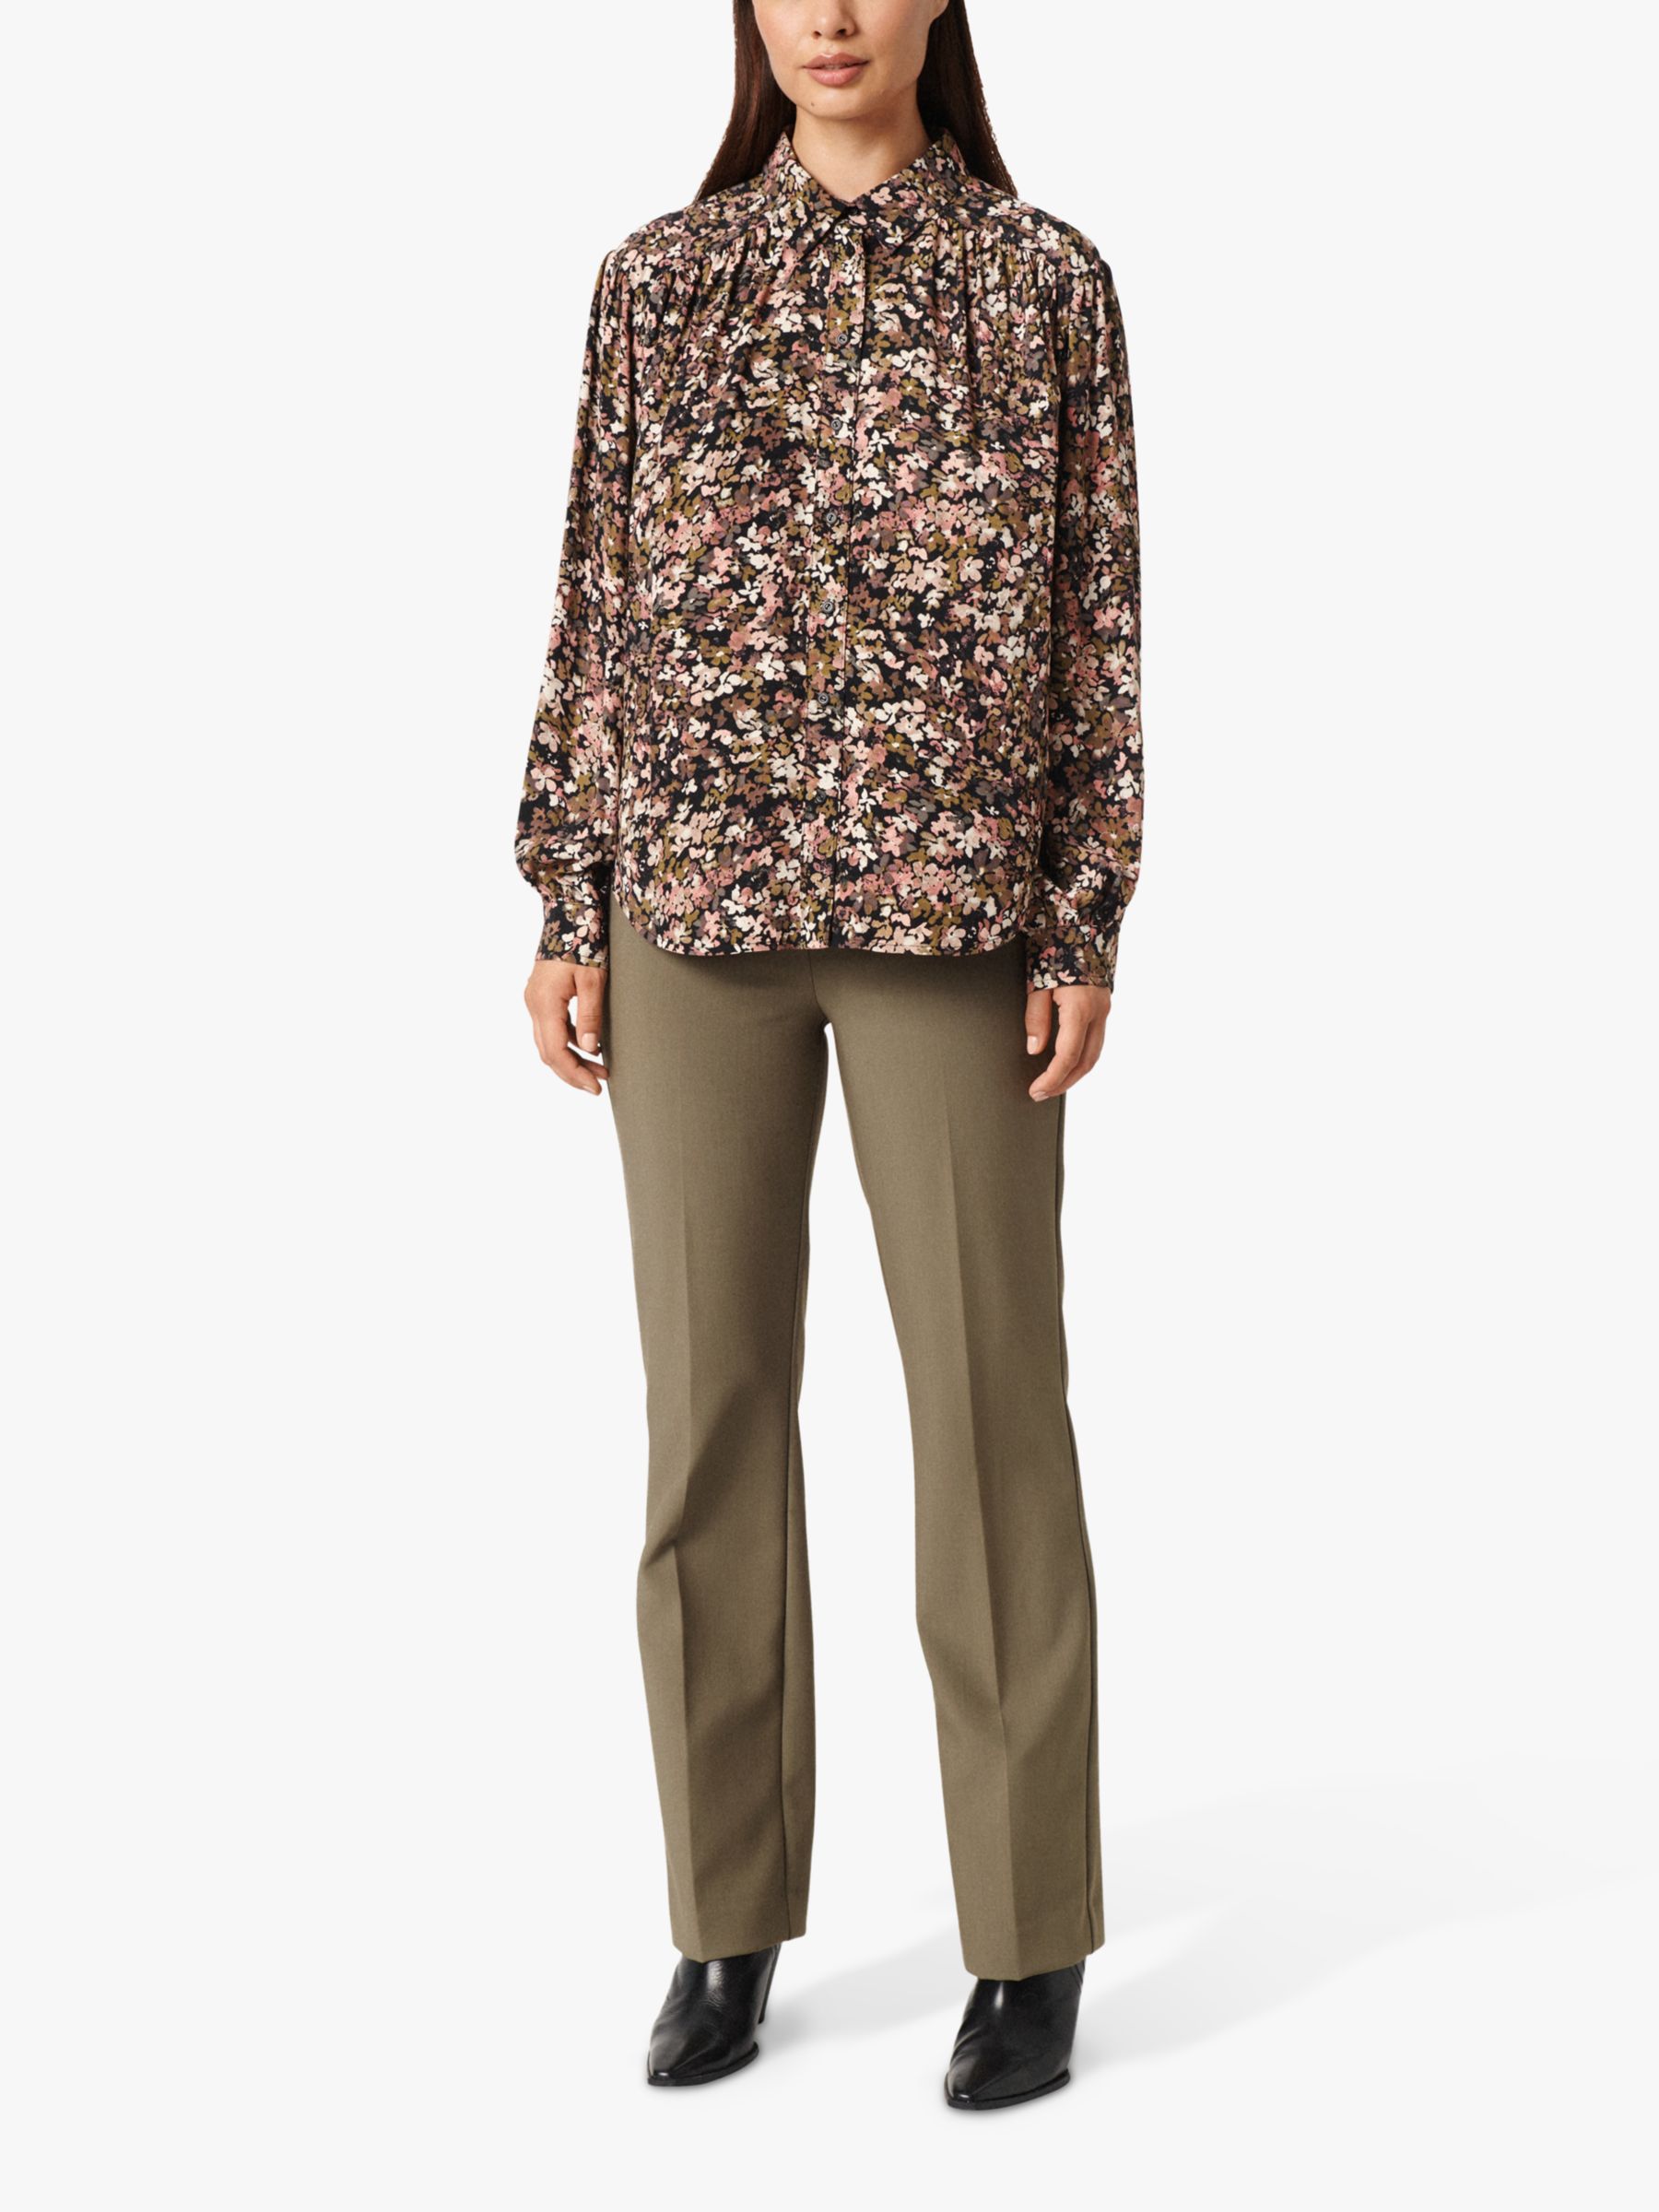 Buy Soaked In Luxury Ebba Long Sleeve Floral Shirt, Tea Leaf Daisy Field Online at johnlewis.com